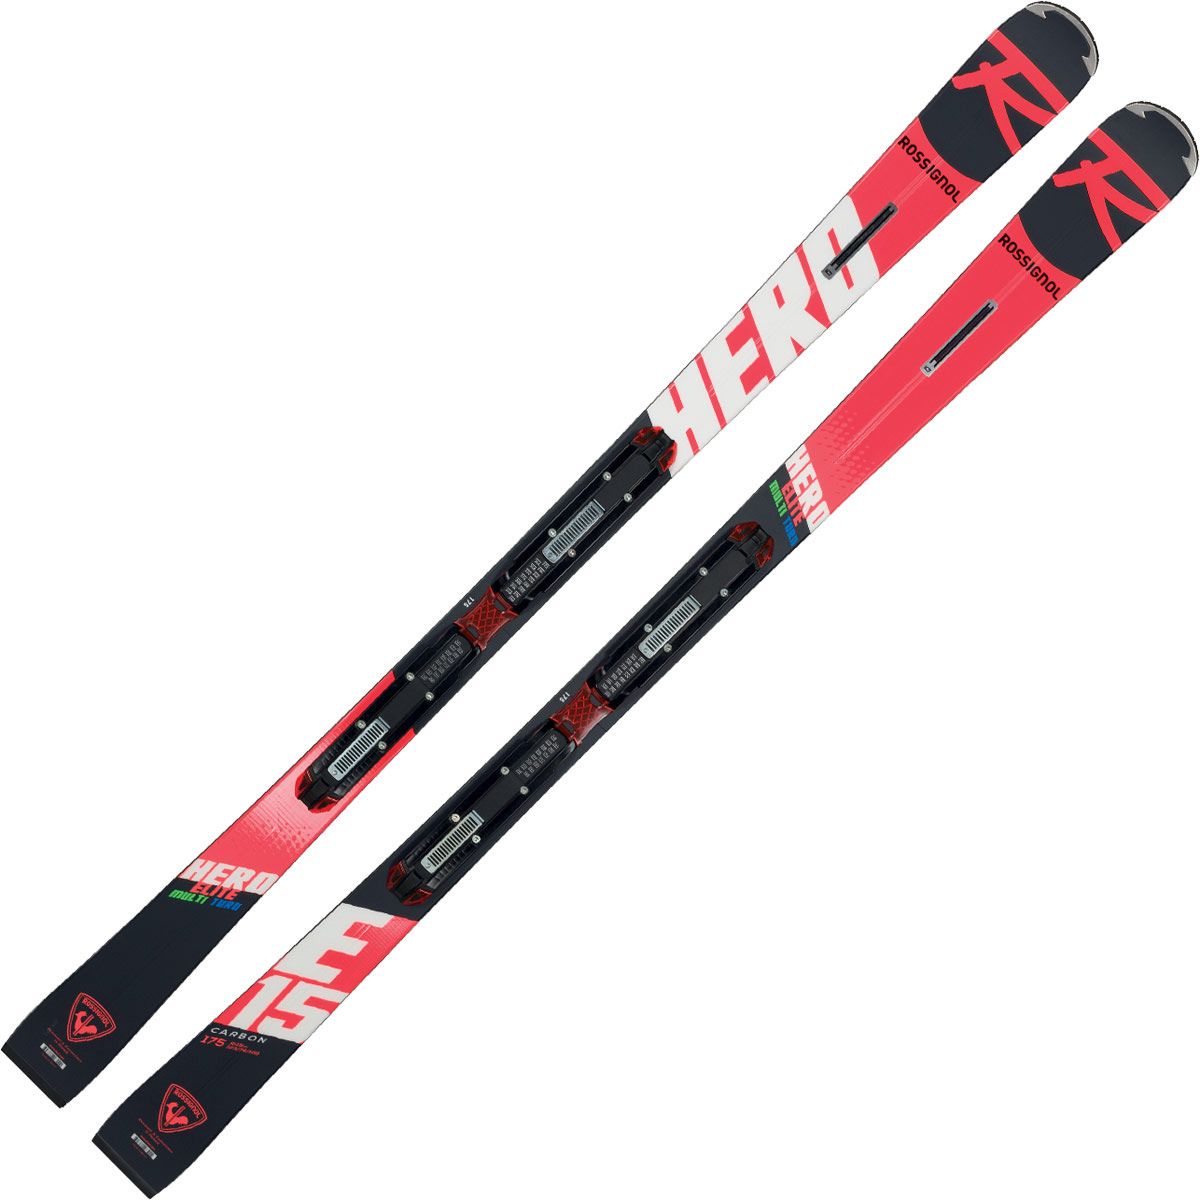 Pack Skis Test/Occasion Hero Elite MT CA 2020 + Fixations NX12 Konect